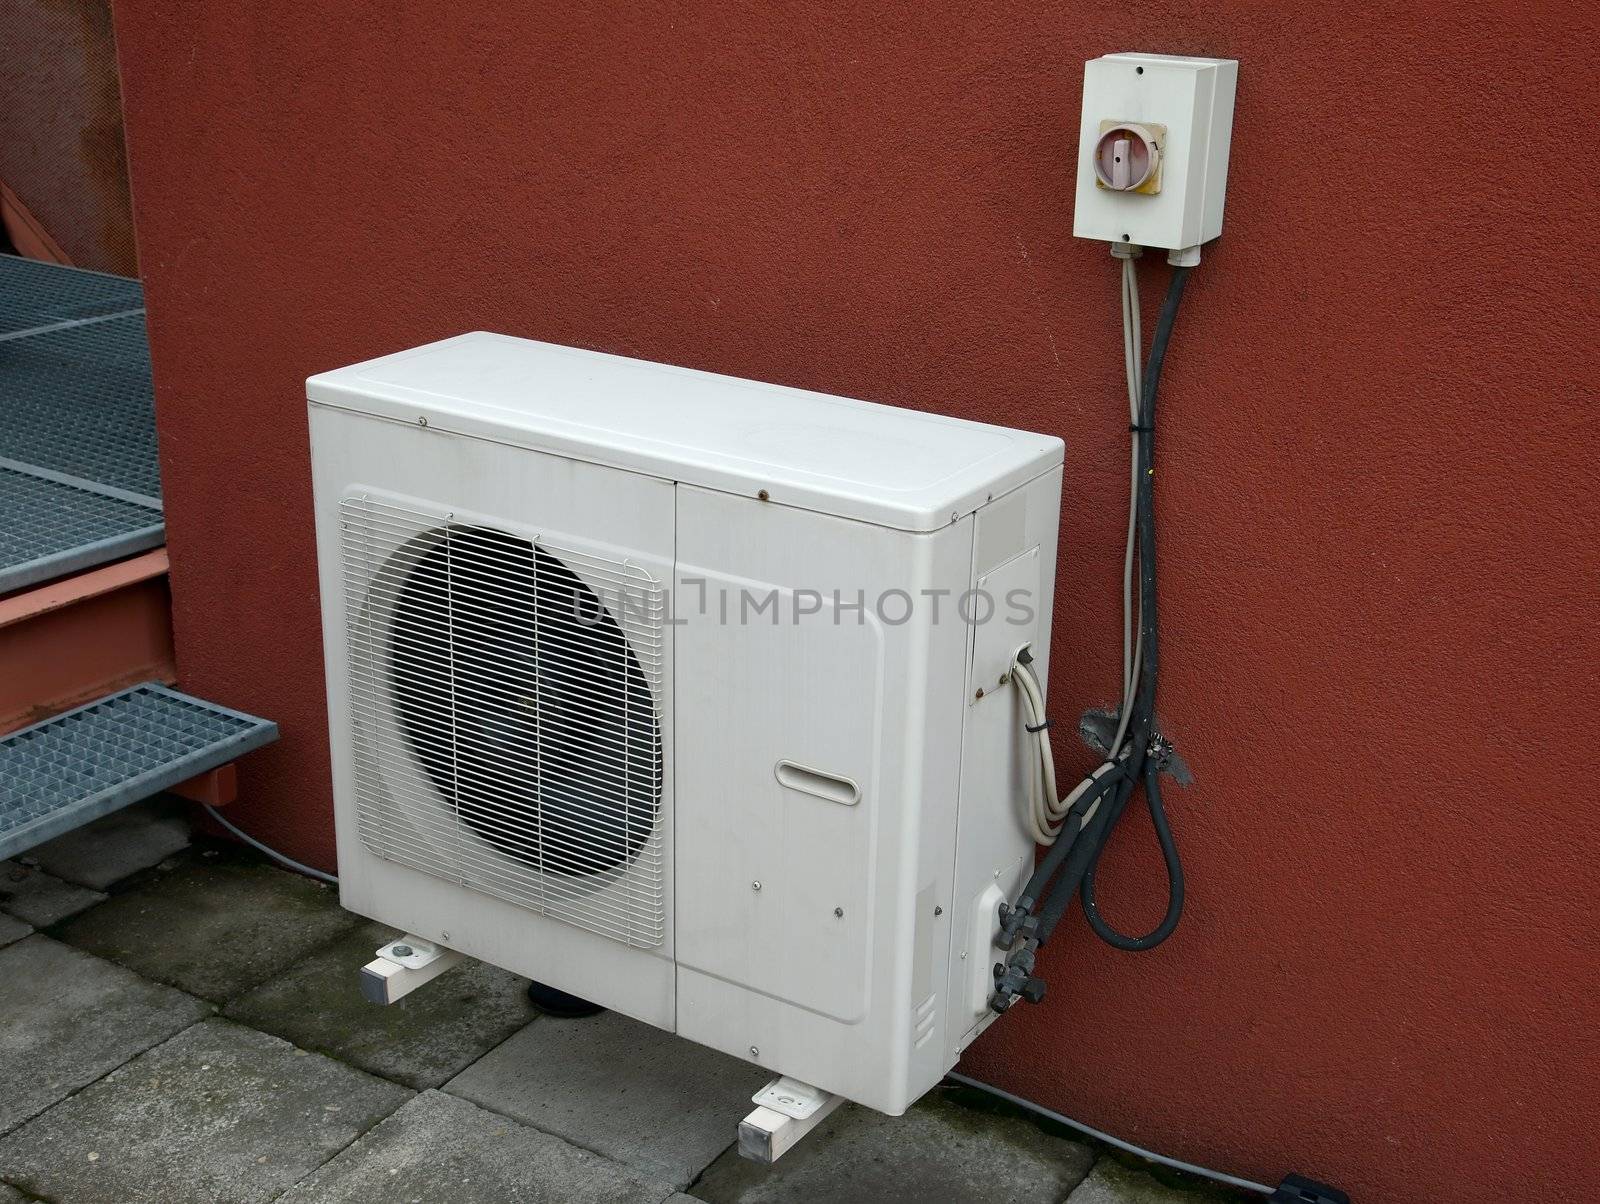 Exterior unit of an air conditioner on the wall